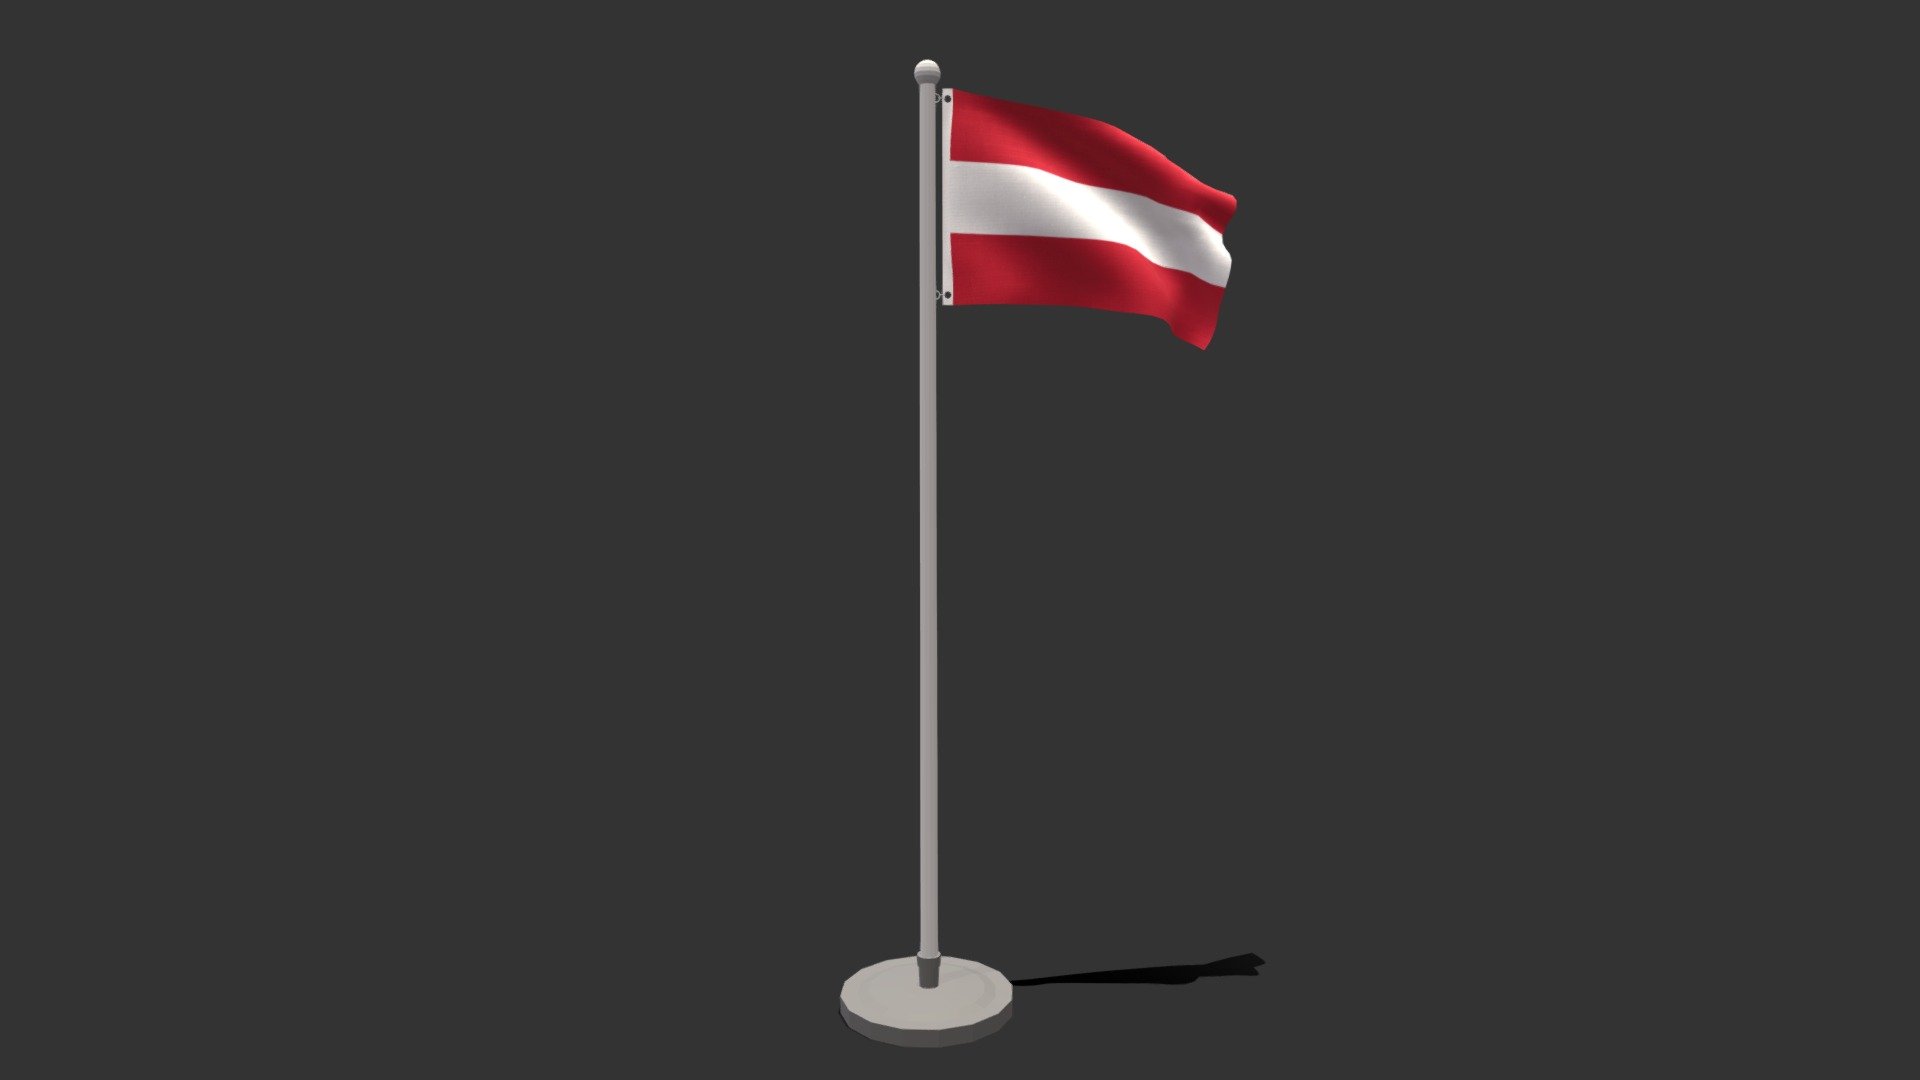 This is a low poly 3D model of an animated flag of Austria. The low poly flag was modeled and prepared for low-poly style renderings, background, general CG visualization presented as 2 meshes with quads only.

Verts : 1.536 Faces : 1.459.

1024x1024 textures included. Diffuse, roughness and normal maps available only for flag. The pole have simple materials with colors.

The animation is based on shapekeys, 248 frames and seamless, no rig included.

The original file was created in blender. You will receive a OBJ, FBX, blend, DAE, Stl, gLTF, abc.

PLEASE NOTE Animation icluded only in blend, abc and glTF files.

Warning: Depending on which software package you are using, the exchange formats (.obj , .dae, .fbx) may not match the preview images exactly. Due to the nature of these formats, there may be some textures that have to be loaded by hand and possibly triangulated geometry 3d model